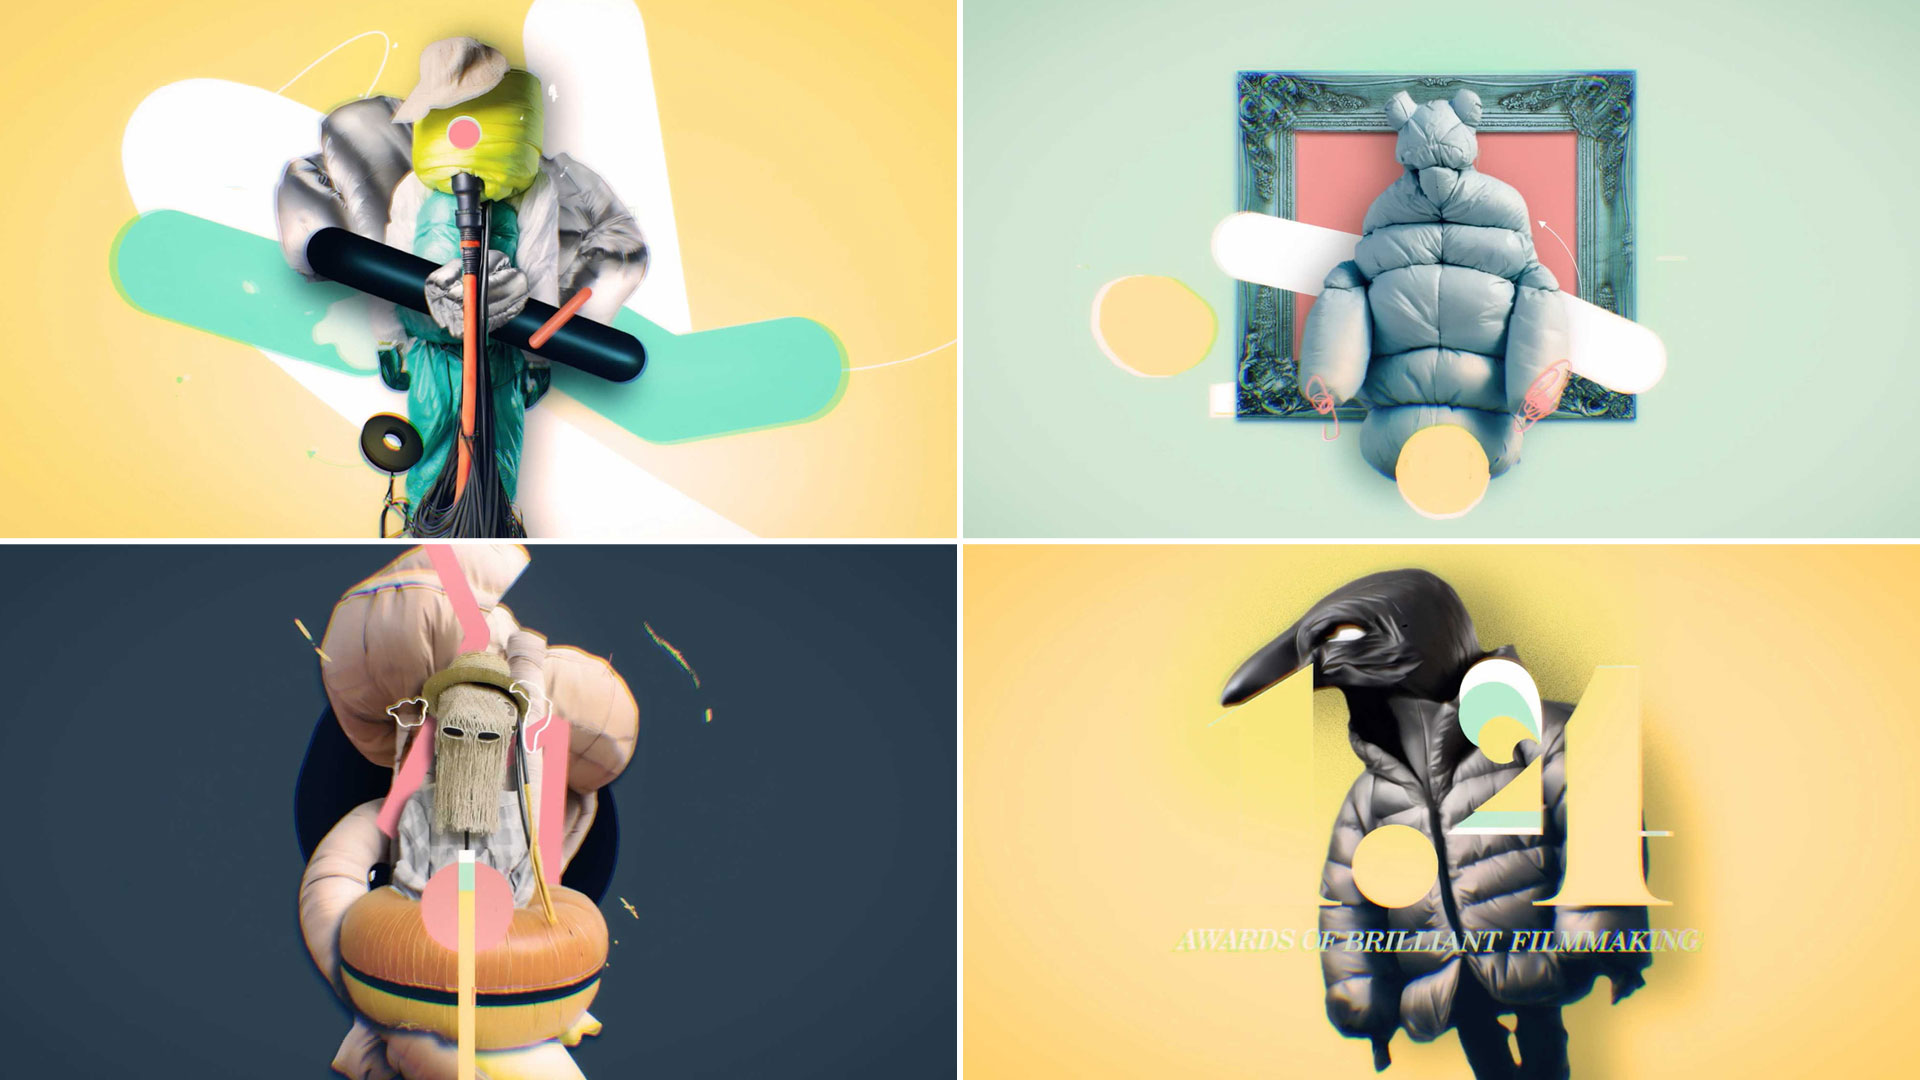 Savants and Not to Scale Open the 1.4 Awards in London – Motion design [Video]